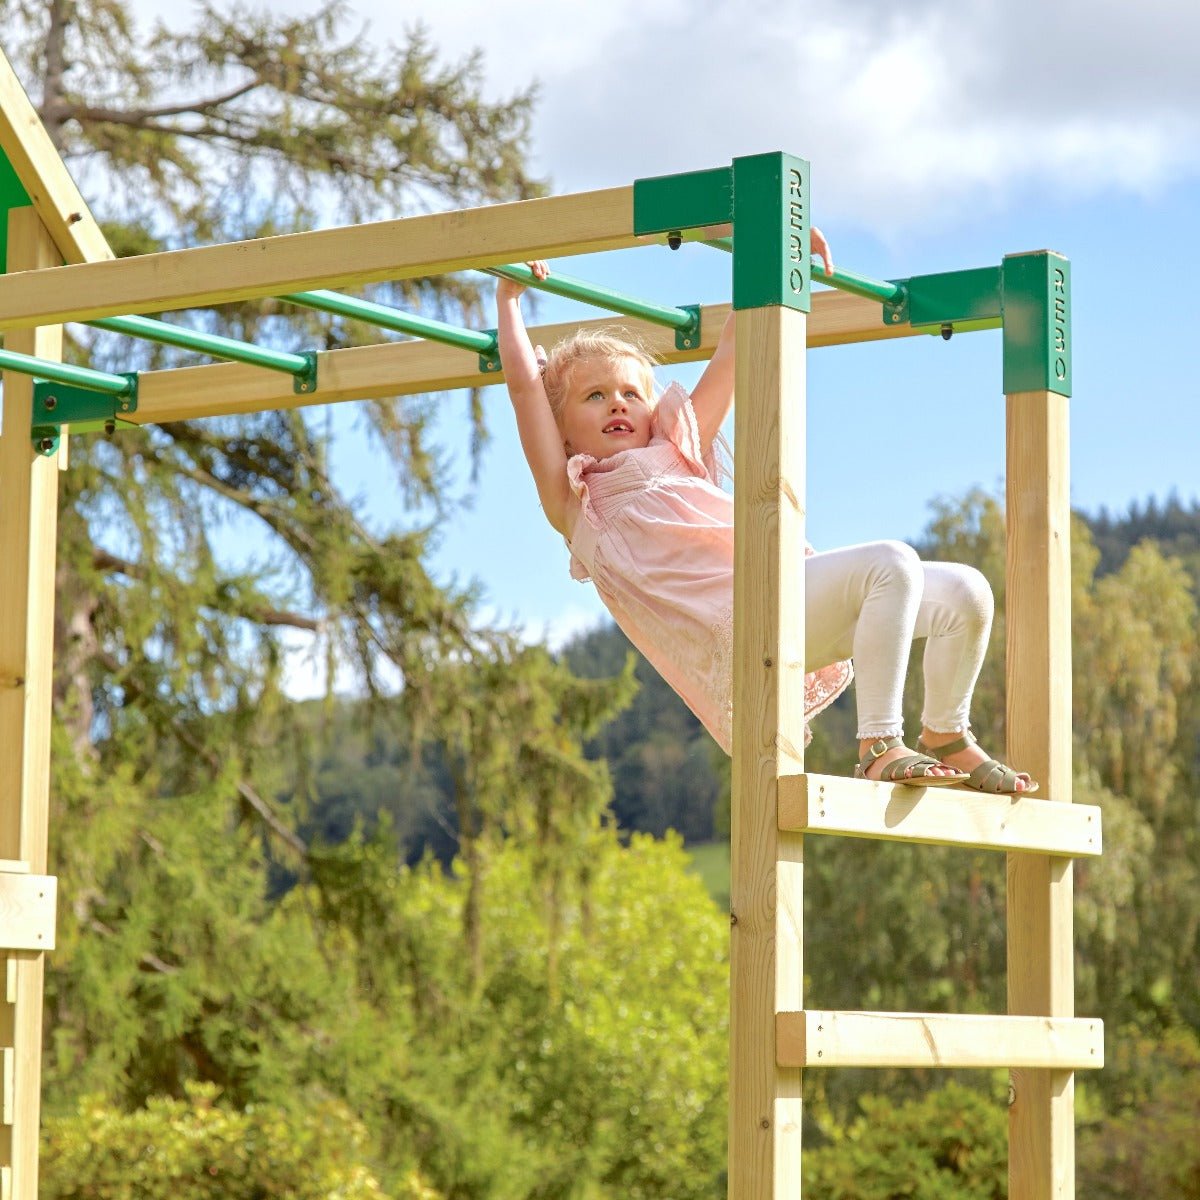 Rebo Wooden Climbing Frame with Swings, Slide, Up & over Climbing wall and Monkey Bars - Dolomite Pink